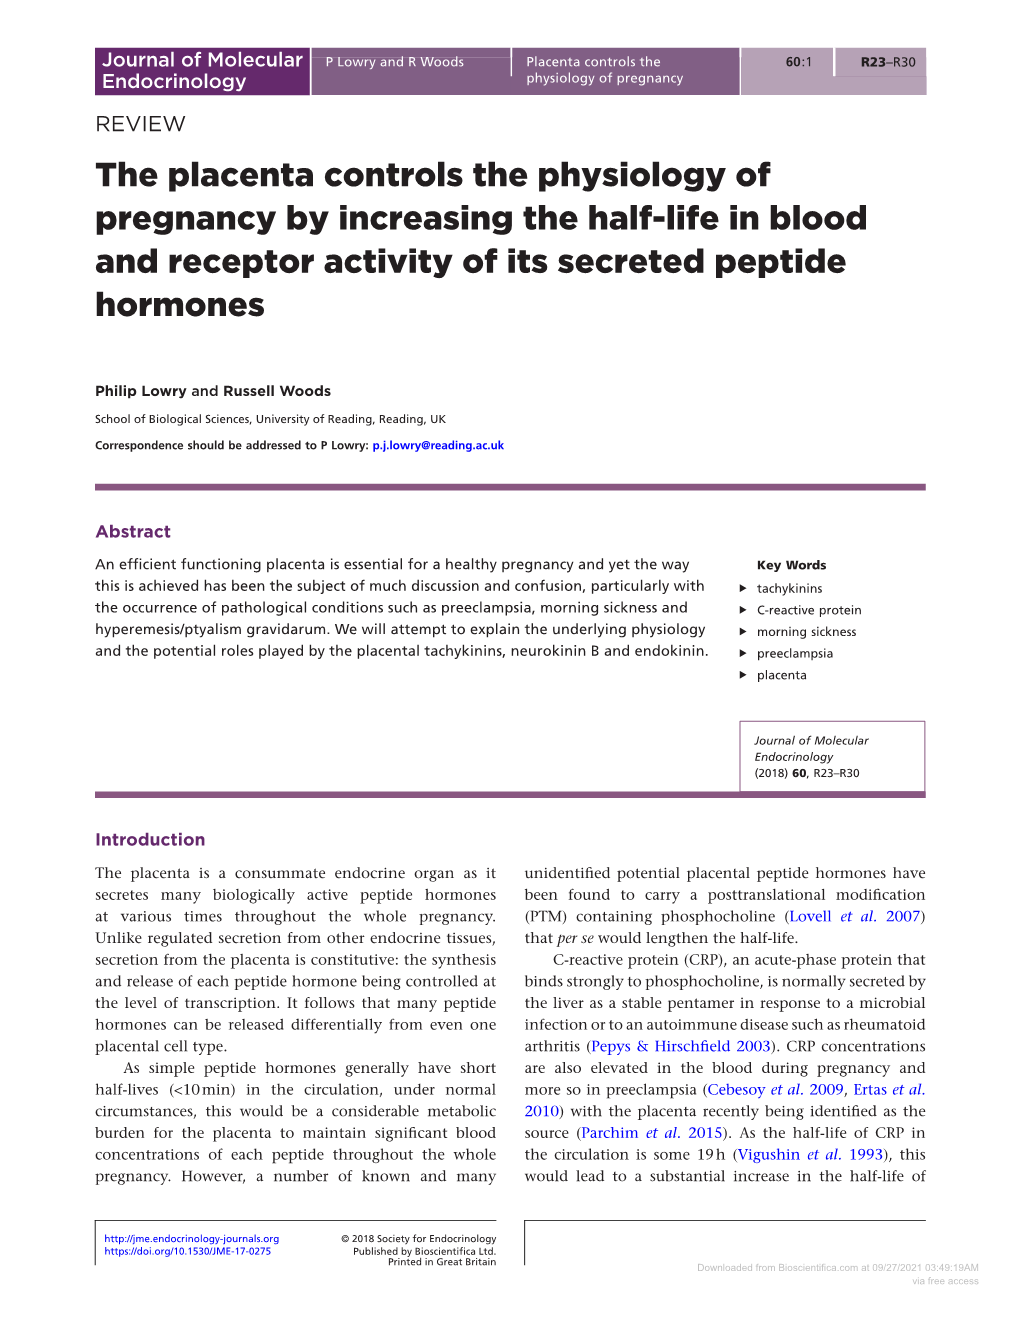 The Placenta Controls the Physiology of Pregnancy by Increasing the Half-Life in Blood and Receptor Activity of Its Secreted Peptide Hormones